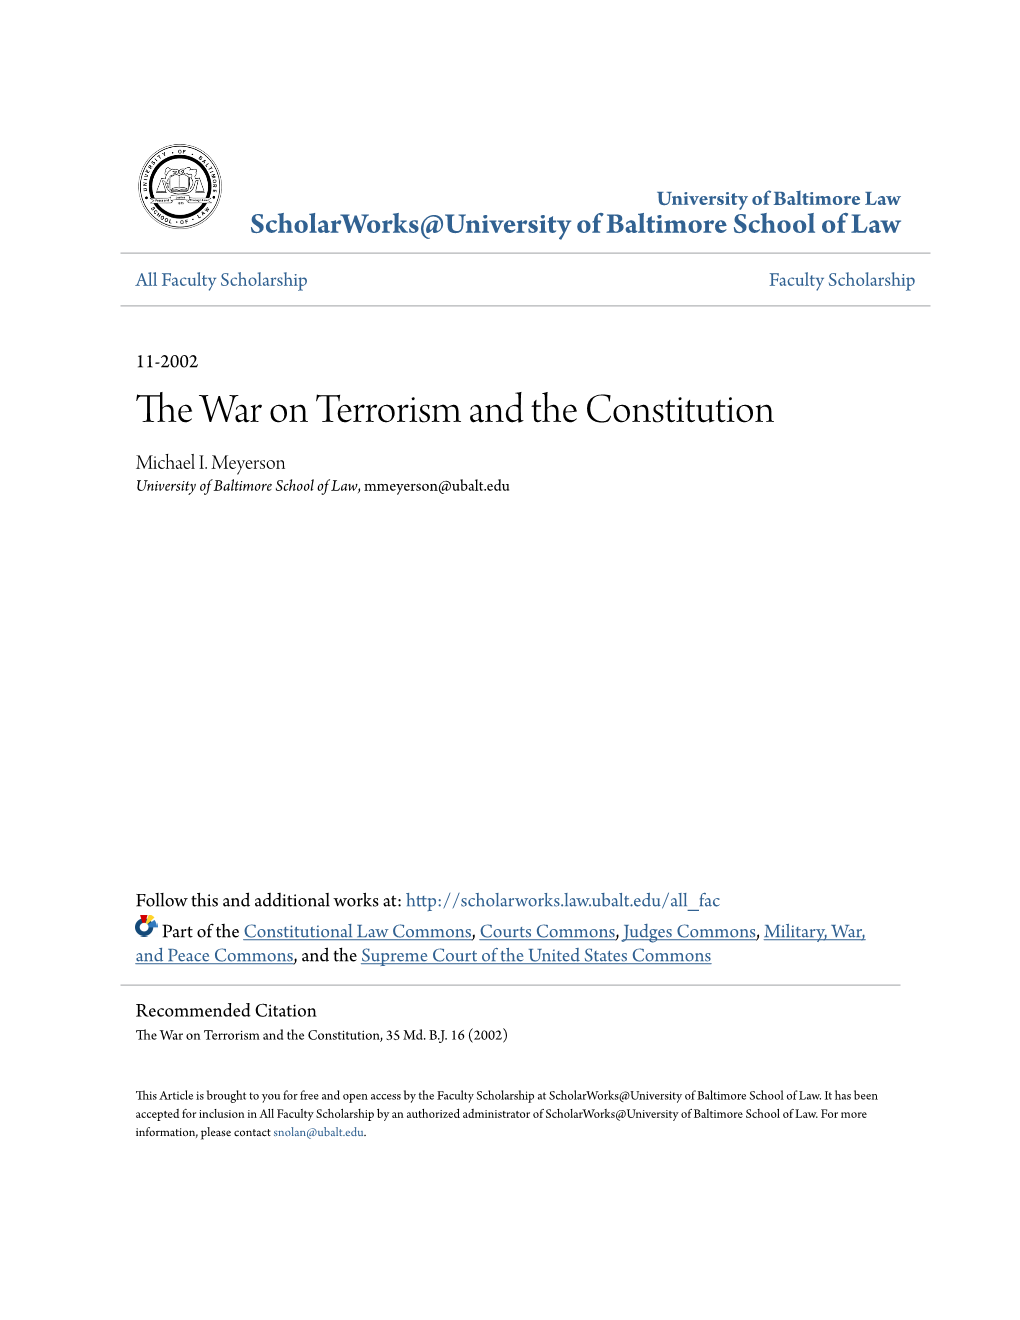 The War on Terrorism and the Constitution